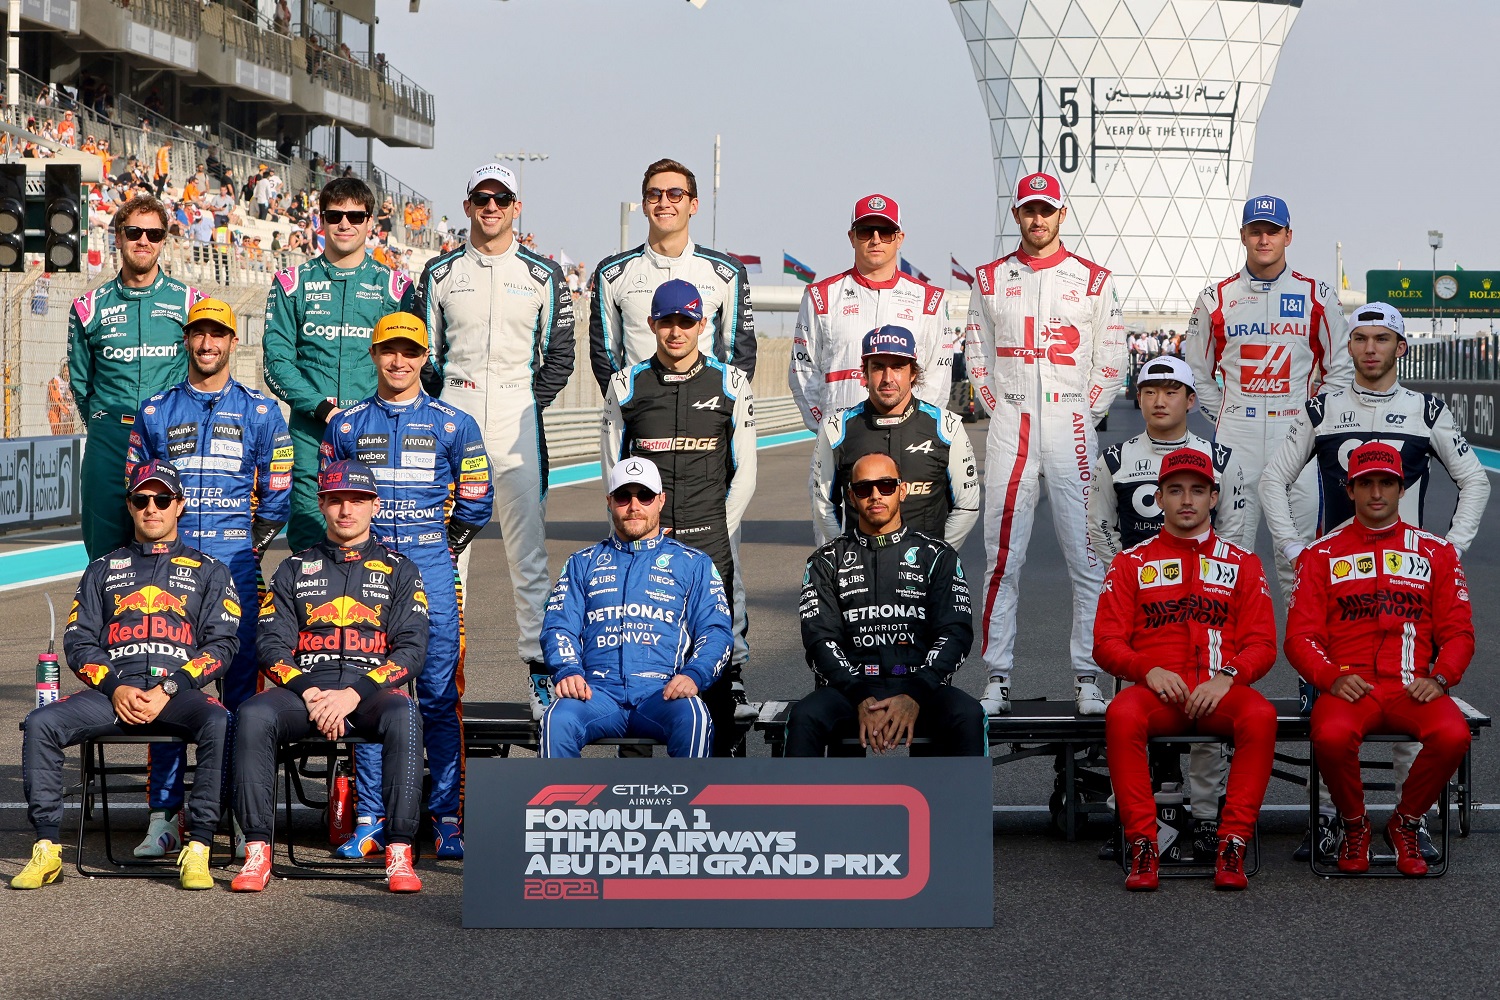 Drivers pose for a picture at the Yas Marina Circuit before the Abu Dhabi Formula 1 Grand Prix on Dec. 12, 2021.